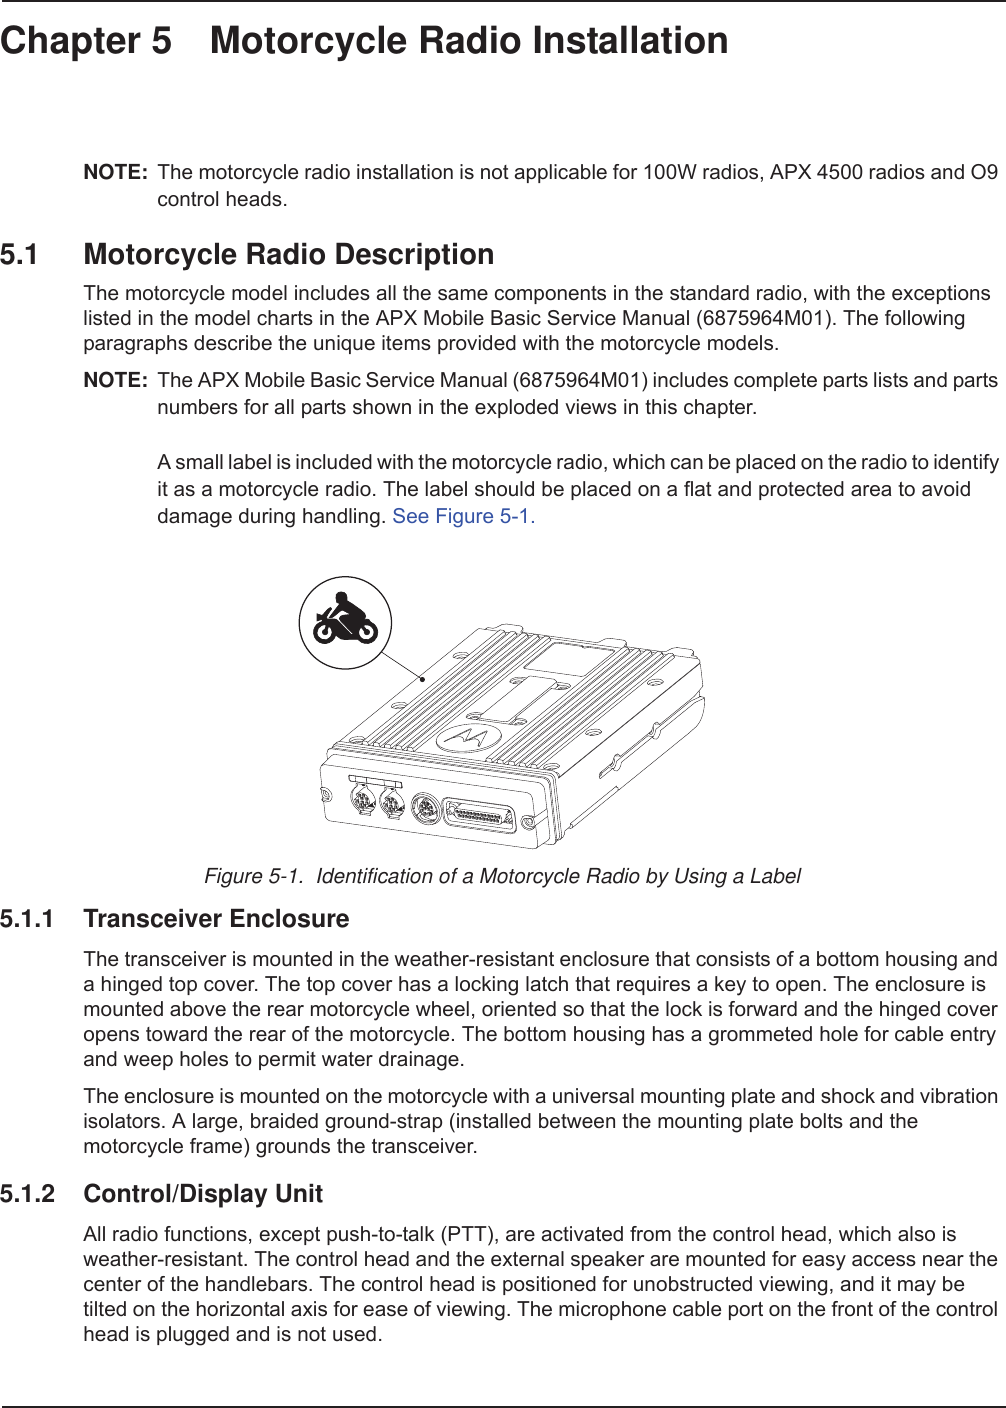 Chapter 5 Motorcycle Radio InstallationNOTE: The motorcycle radio installation is not applicable for 100W radios, APX 4500 radios and O9 control heads.5.1 Motorcycle Radio DescriptionThe motorcycle model includes all the same components in the standard radio, with the exceptions listed in the model charts in the APX Mobile Basic Service Manual (6875964M01). The following paragraphs describe the unique items provided with the motorcycle models. NOTE: The APX Mobile Basic Service Manual (6875964M01) includes complete parts lists and parts numbers for all parts shown in the exploded views in this chapter.A small label is included with the motorcycle radio, which can be placed on the radio to identify it as a motorcycle radio. The label should be placed on a flat and protected area to avoid damage during handling. See Figure 5-1.Figure 5-1.  Identification of a Motorcycle Radio by Using a Label5.1.1 Transceiver EnclosureThe transceiver is mounted in the weather-resistant enclosure that consists of a bottom housing and a hinged top cover. The top cover has a locking latch that requires a key to open. The enclosure is mounted above the rear motorcycle wheel, oriented so that the lock is forward and the hinged cover opens toward the rear of the motorcycle. The bottom housing has a grommeted hole for cable entry and weep holes to permit water drainage.The enclosure is mounted on the motorcycle with a universal mounting plate and shock and vibration isolators. A large, braided ground-strap (installed between the mounting plate bolts and the motorcycle frame) grounds the transceiver.5.1.2 Control/Display UnitAll radio functions, except push-to-talk (PTT), are activated from the control head, which also is weather-resistant. The control head and the external speaker are mounted for easy access near the center of the handlebars. The control head is positioned for unobstructed viewing, and it may be tilted on the horizontal axis for ease of viewing. The microphone cable port on the front of the control head is plugged and is not used. 